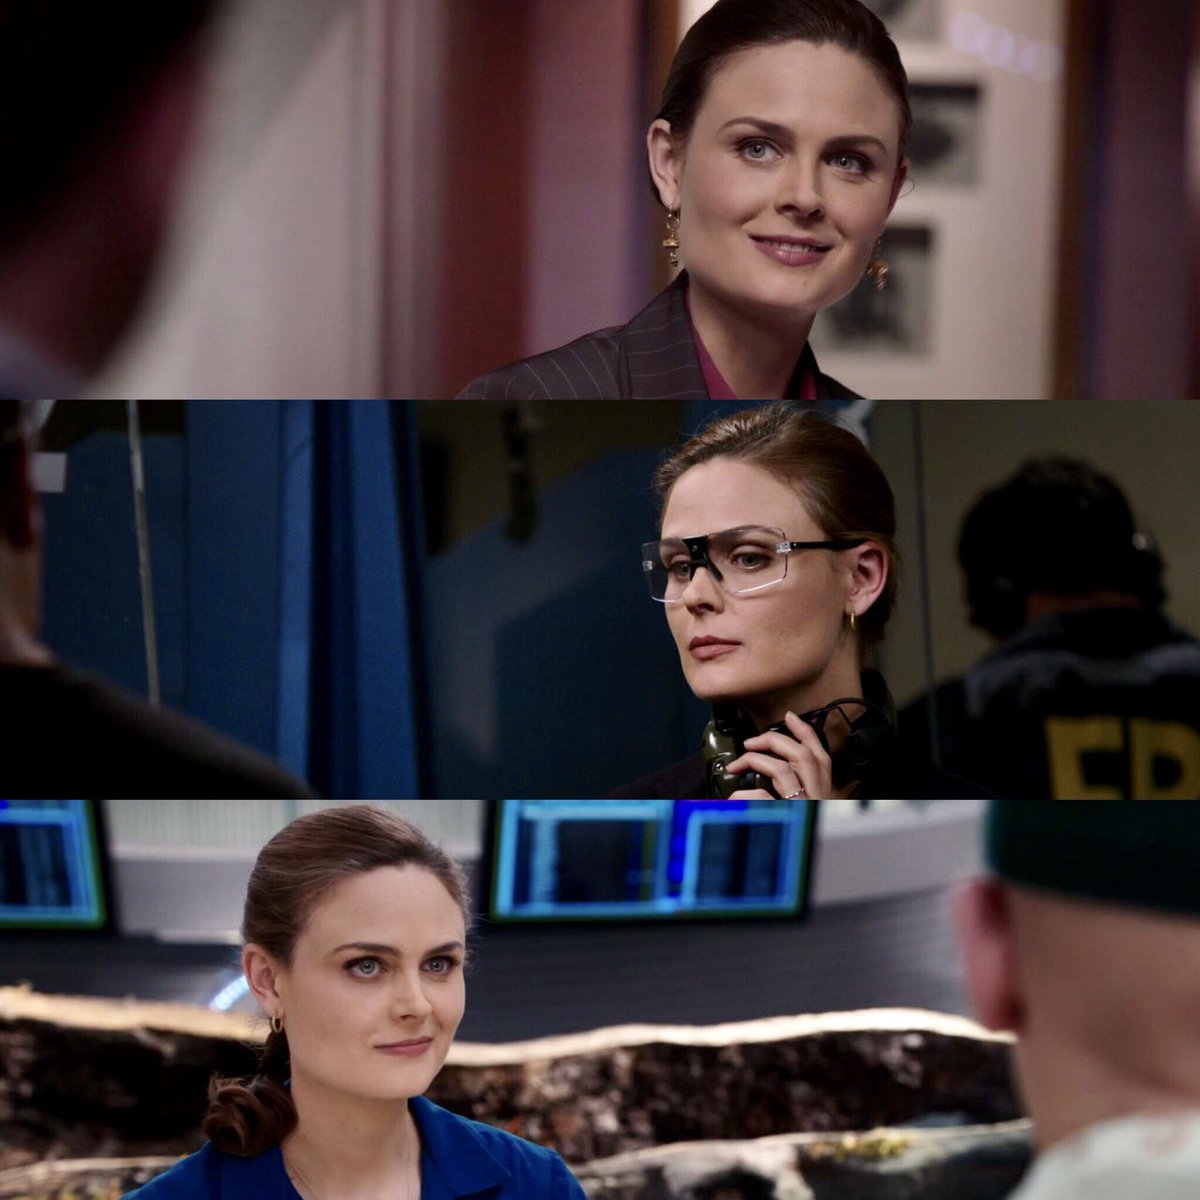 braids? shoutout to the bones hair and makeup crew for putting temperance brennan in braids and therefore giving us emily deschanel in braids